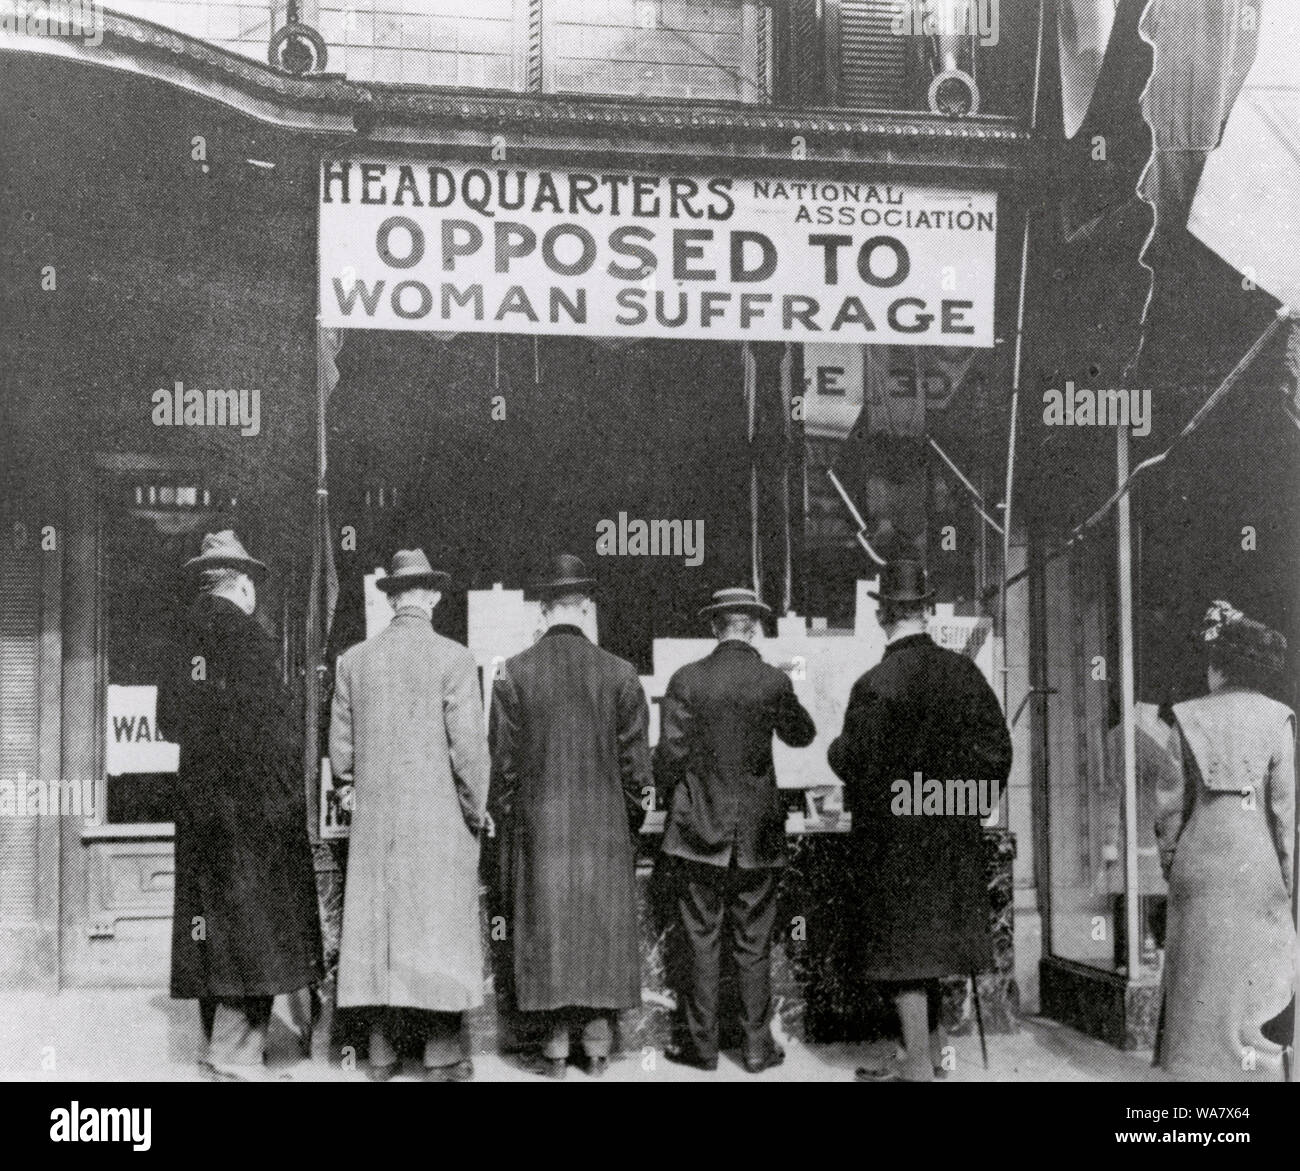 Passers-By Looking at Window Display at the Headquarters of National Association Opposed to Woman Suffrage. 1919 Stock Photo